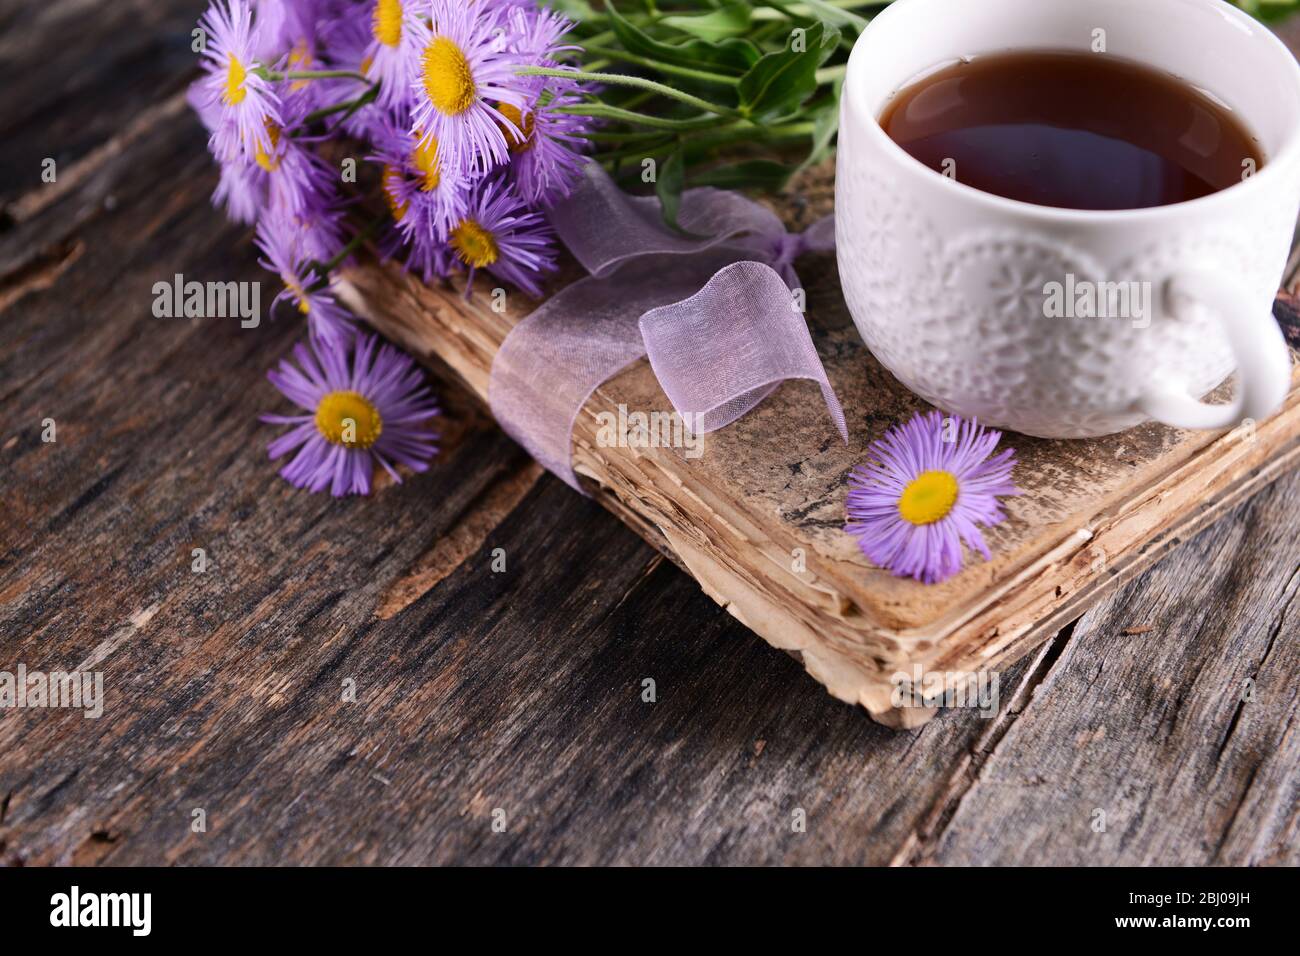 Old book with beautiful flowers and cup of tea on wooden table close up Stock Photo